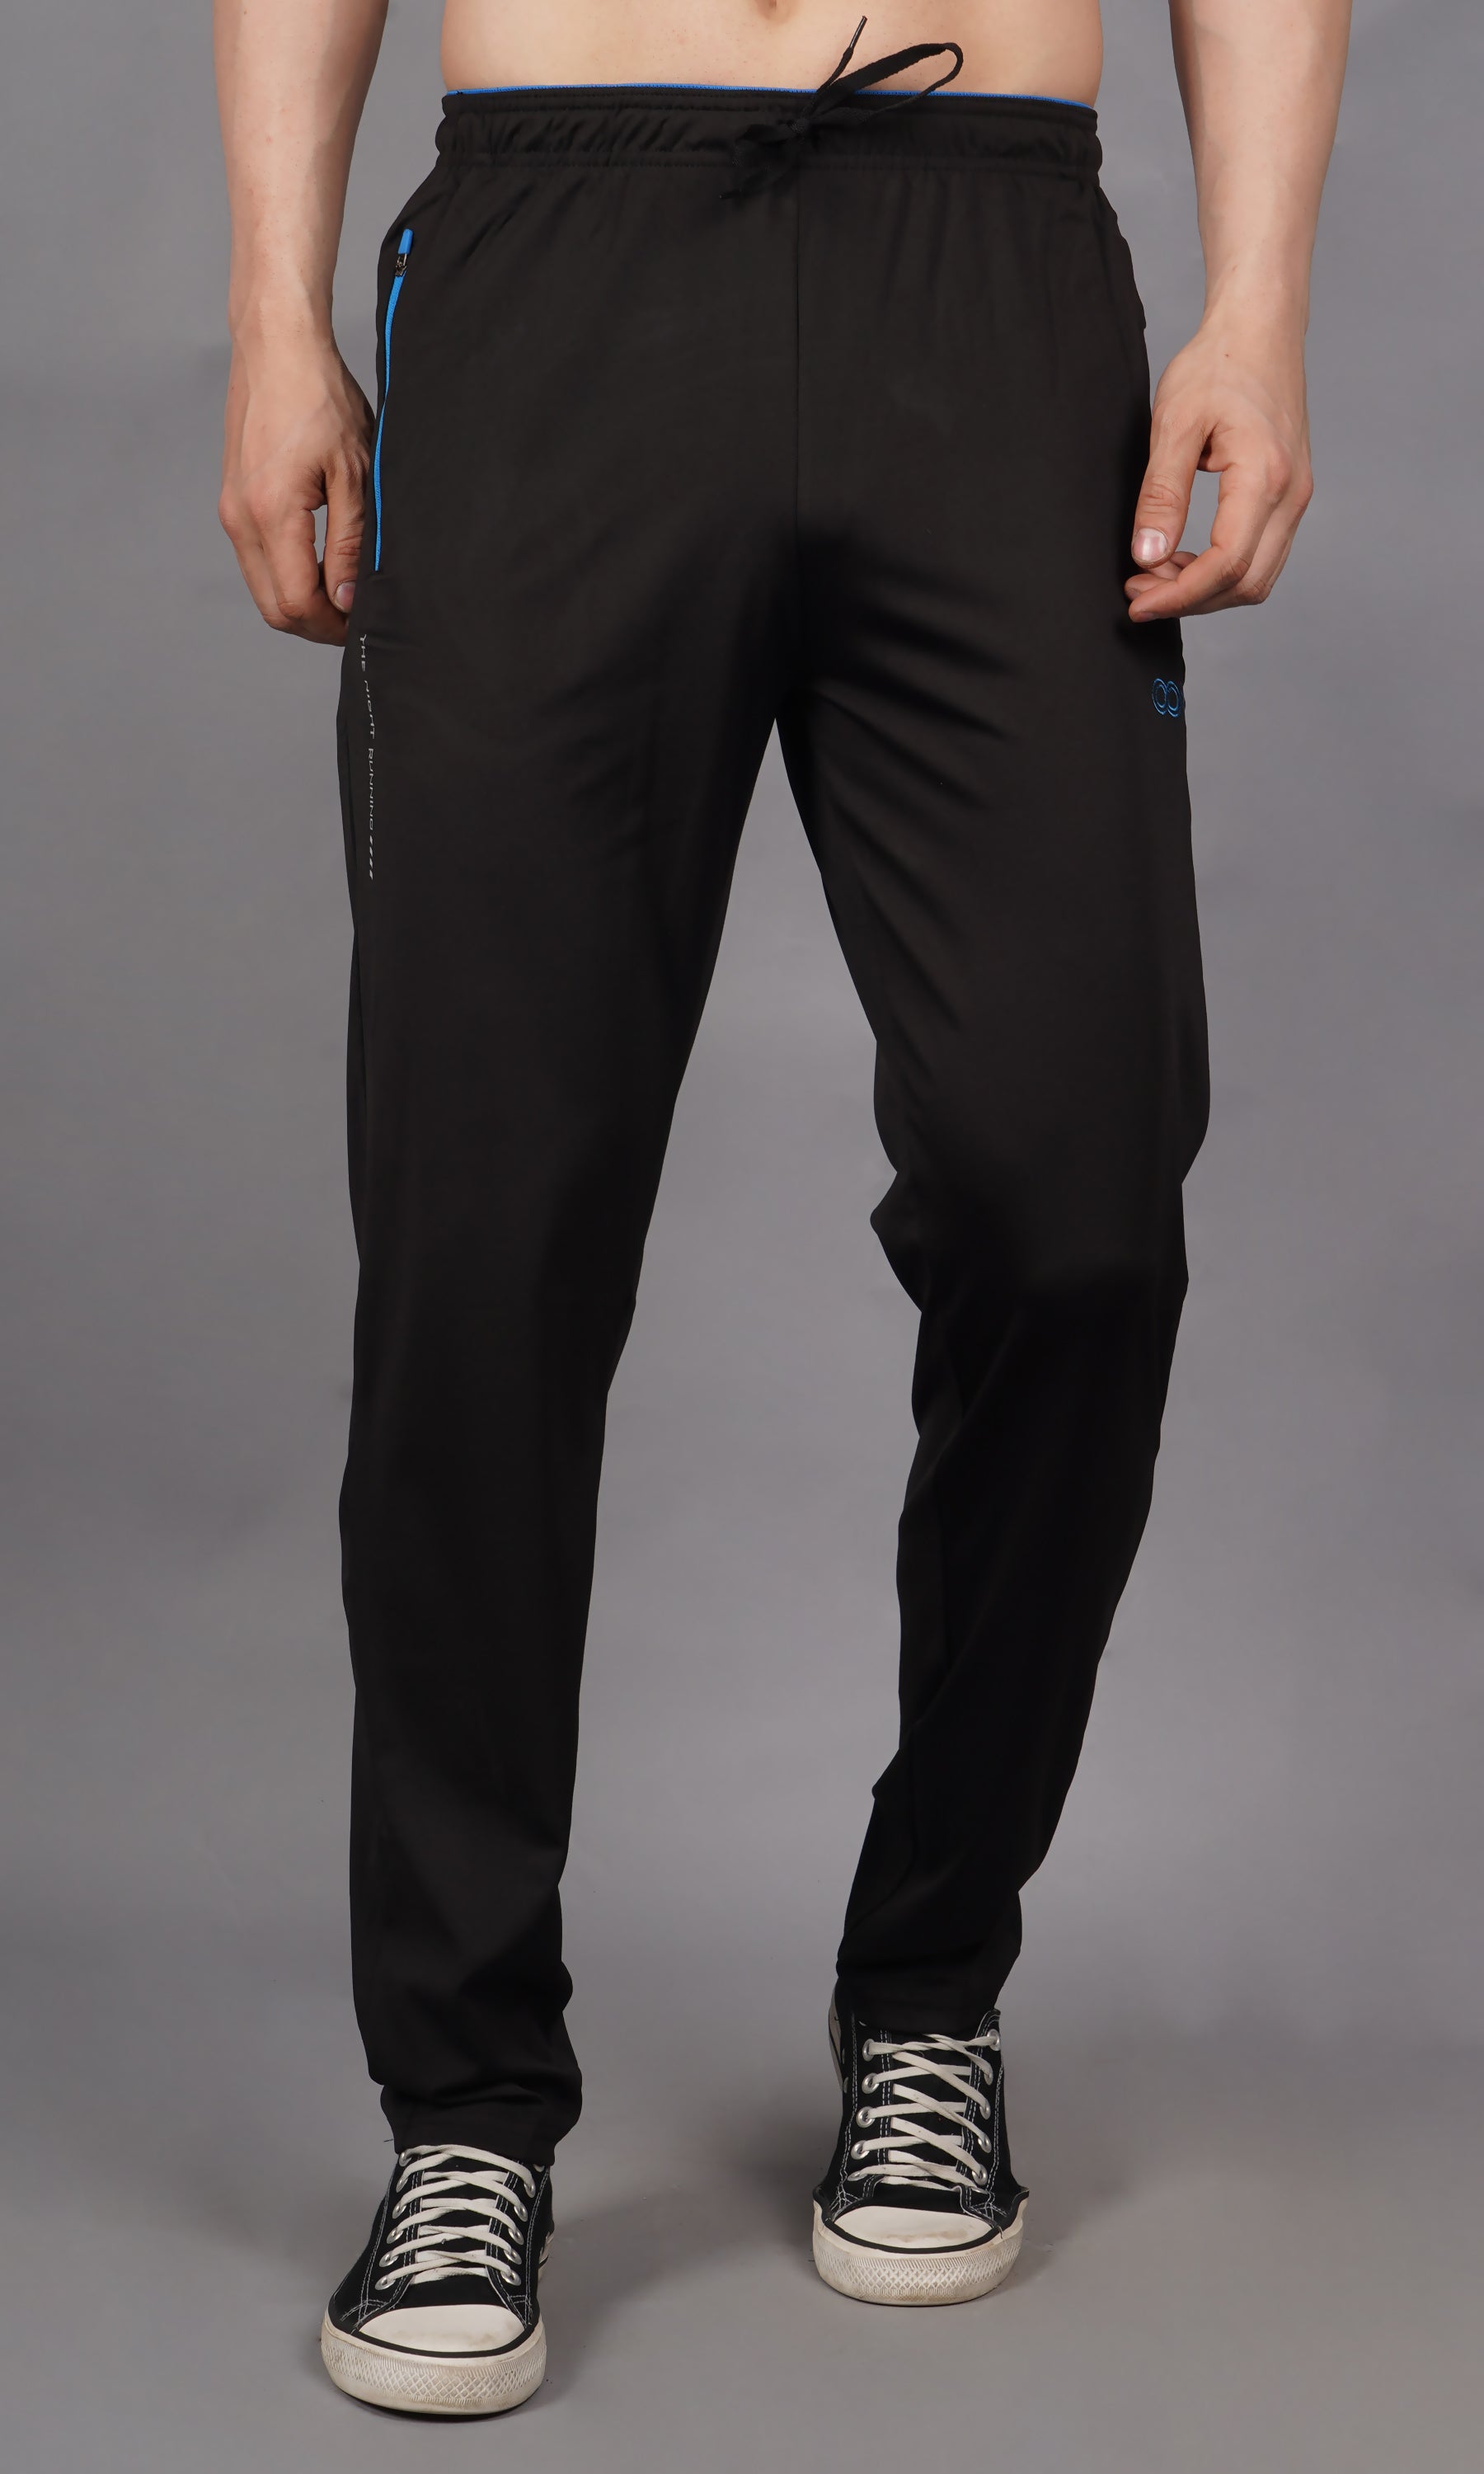 Unisex Stripped Men Black Lycra Track Pant at Rs 400/piece in Bengaluru |  ID: 2852154665962